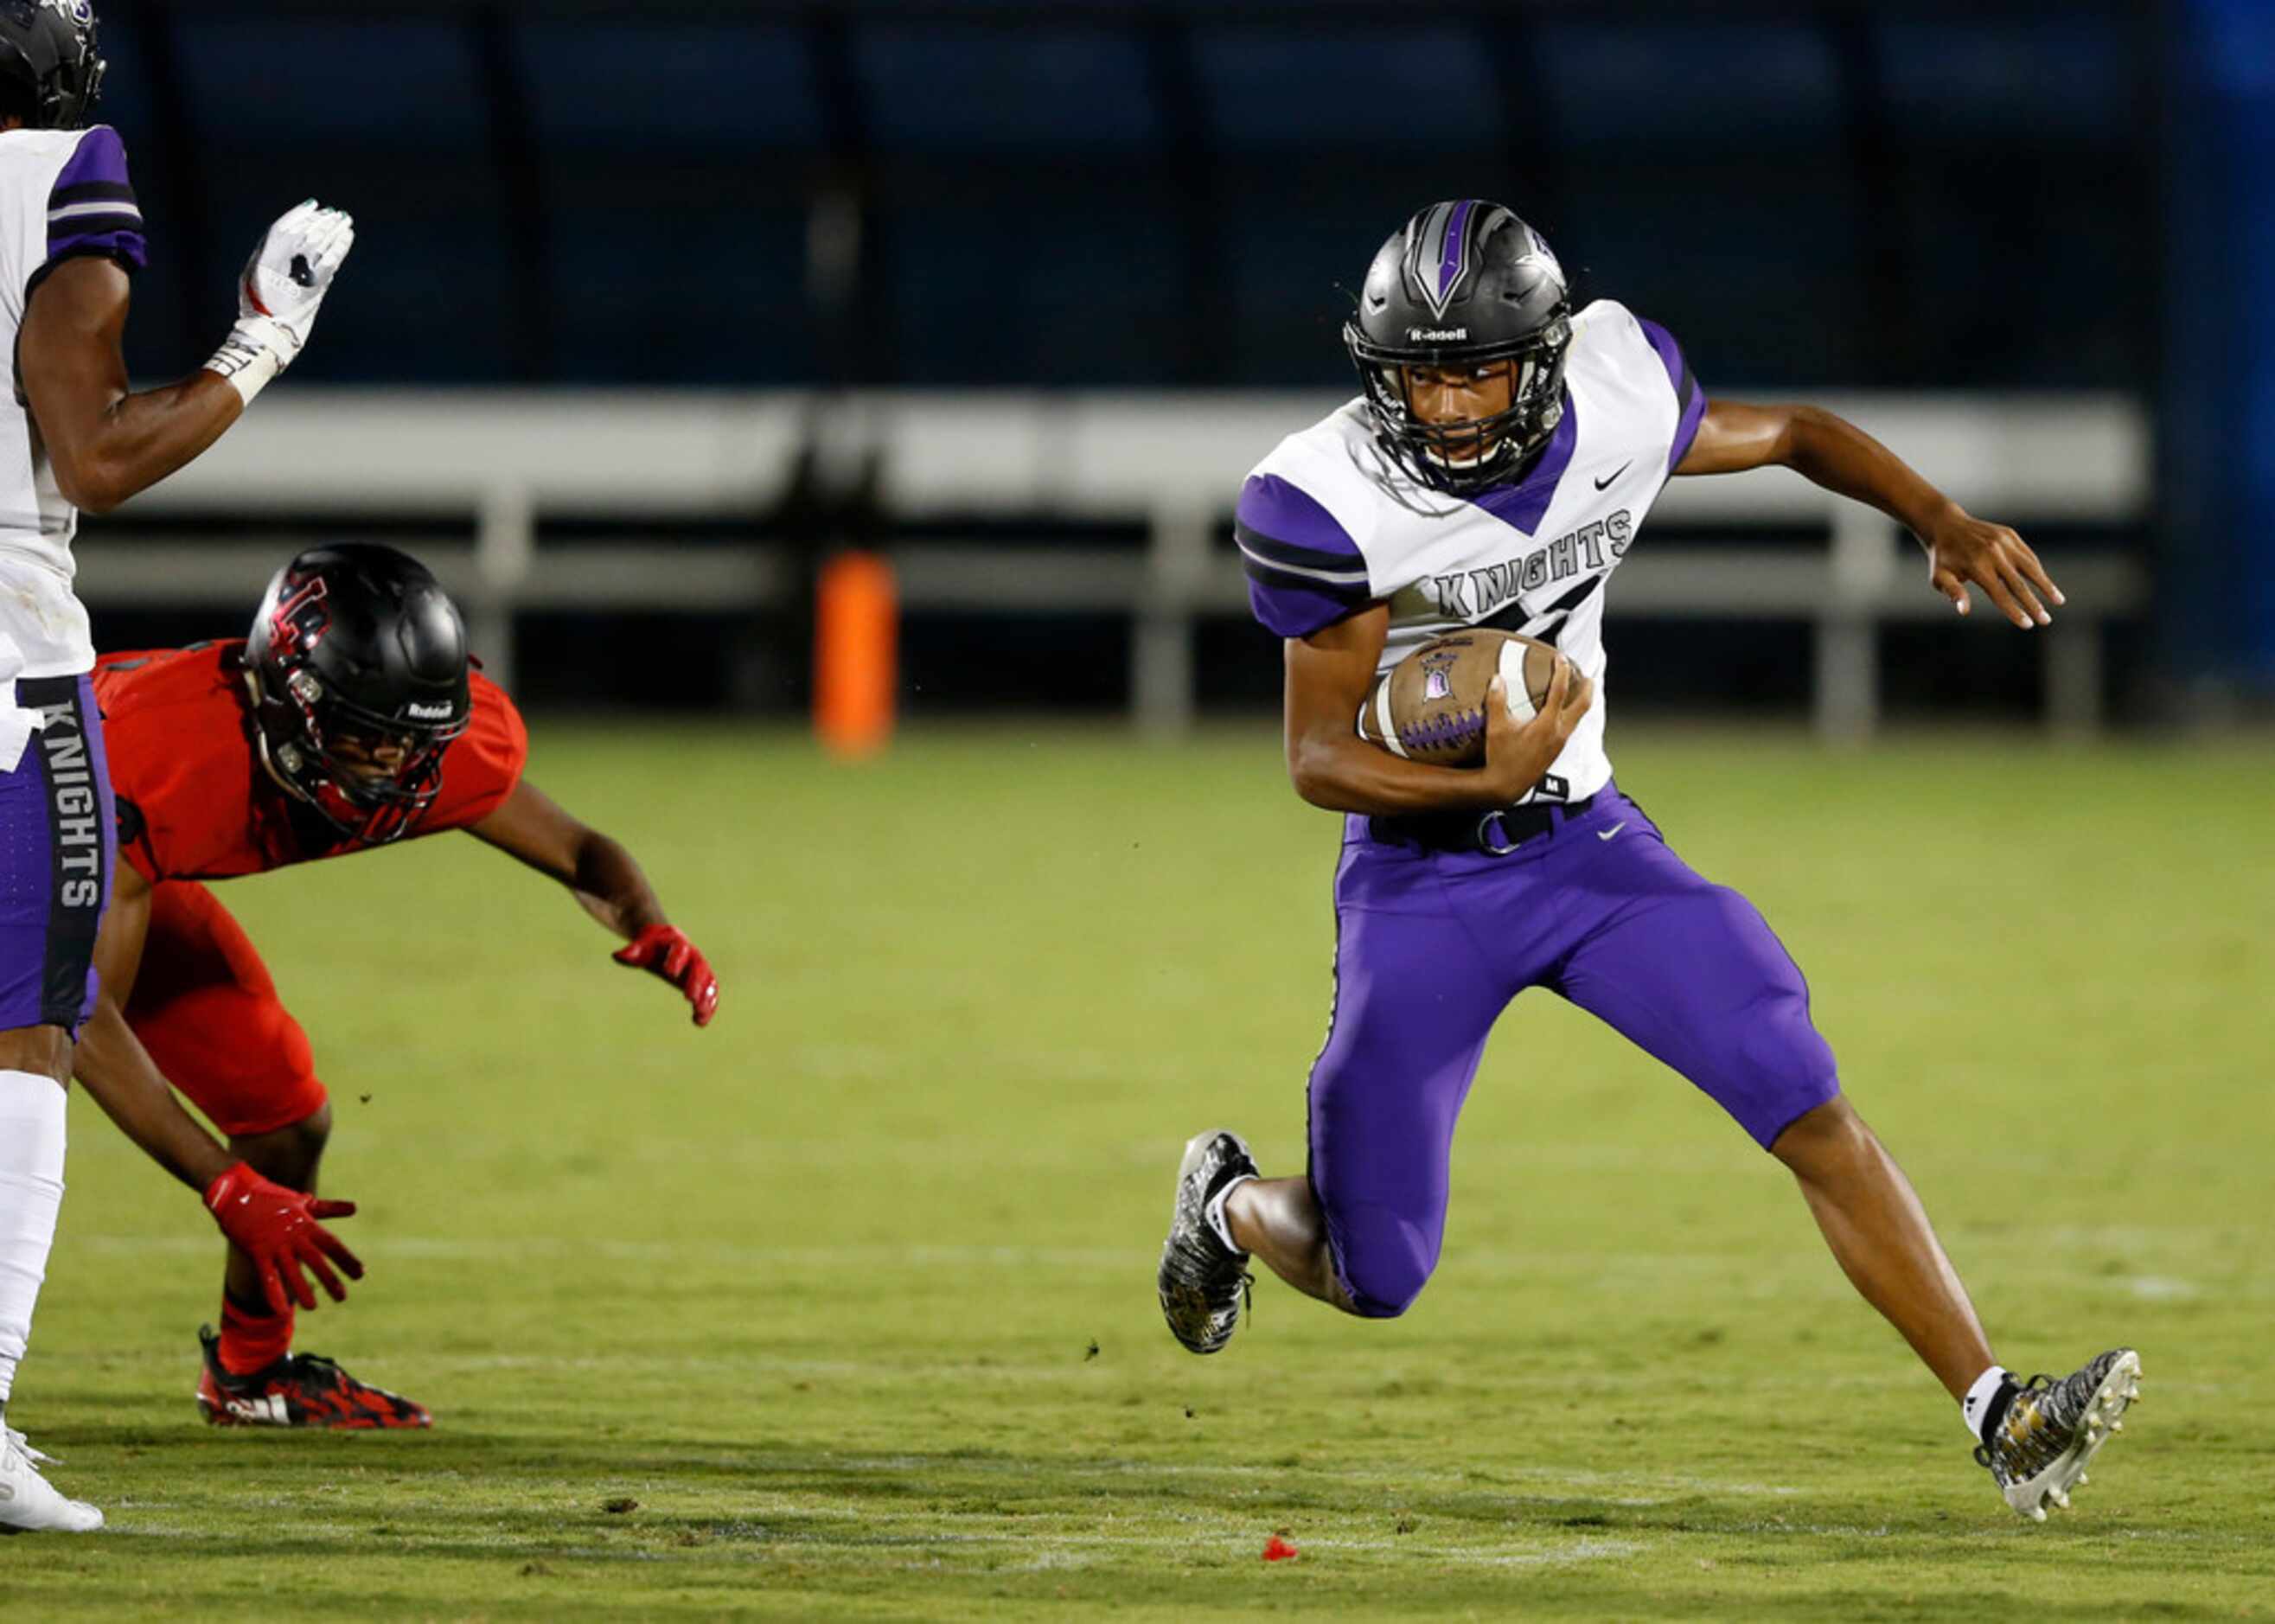 Independence's Reggie Bush rushes up the field in a game against Liberty High School during...